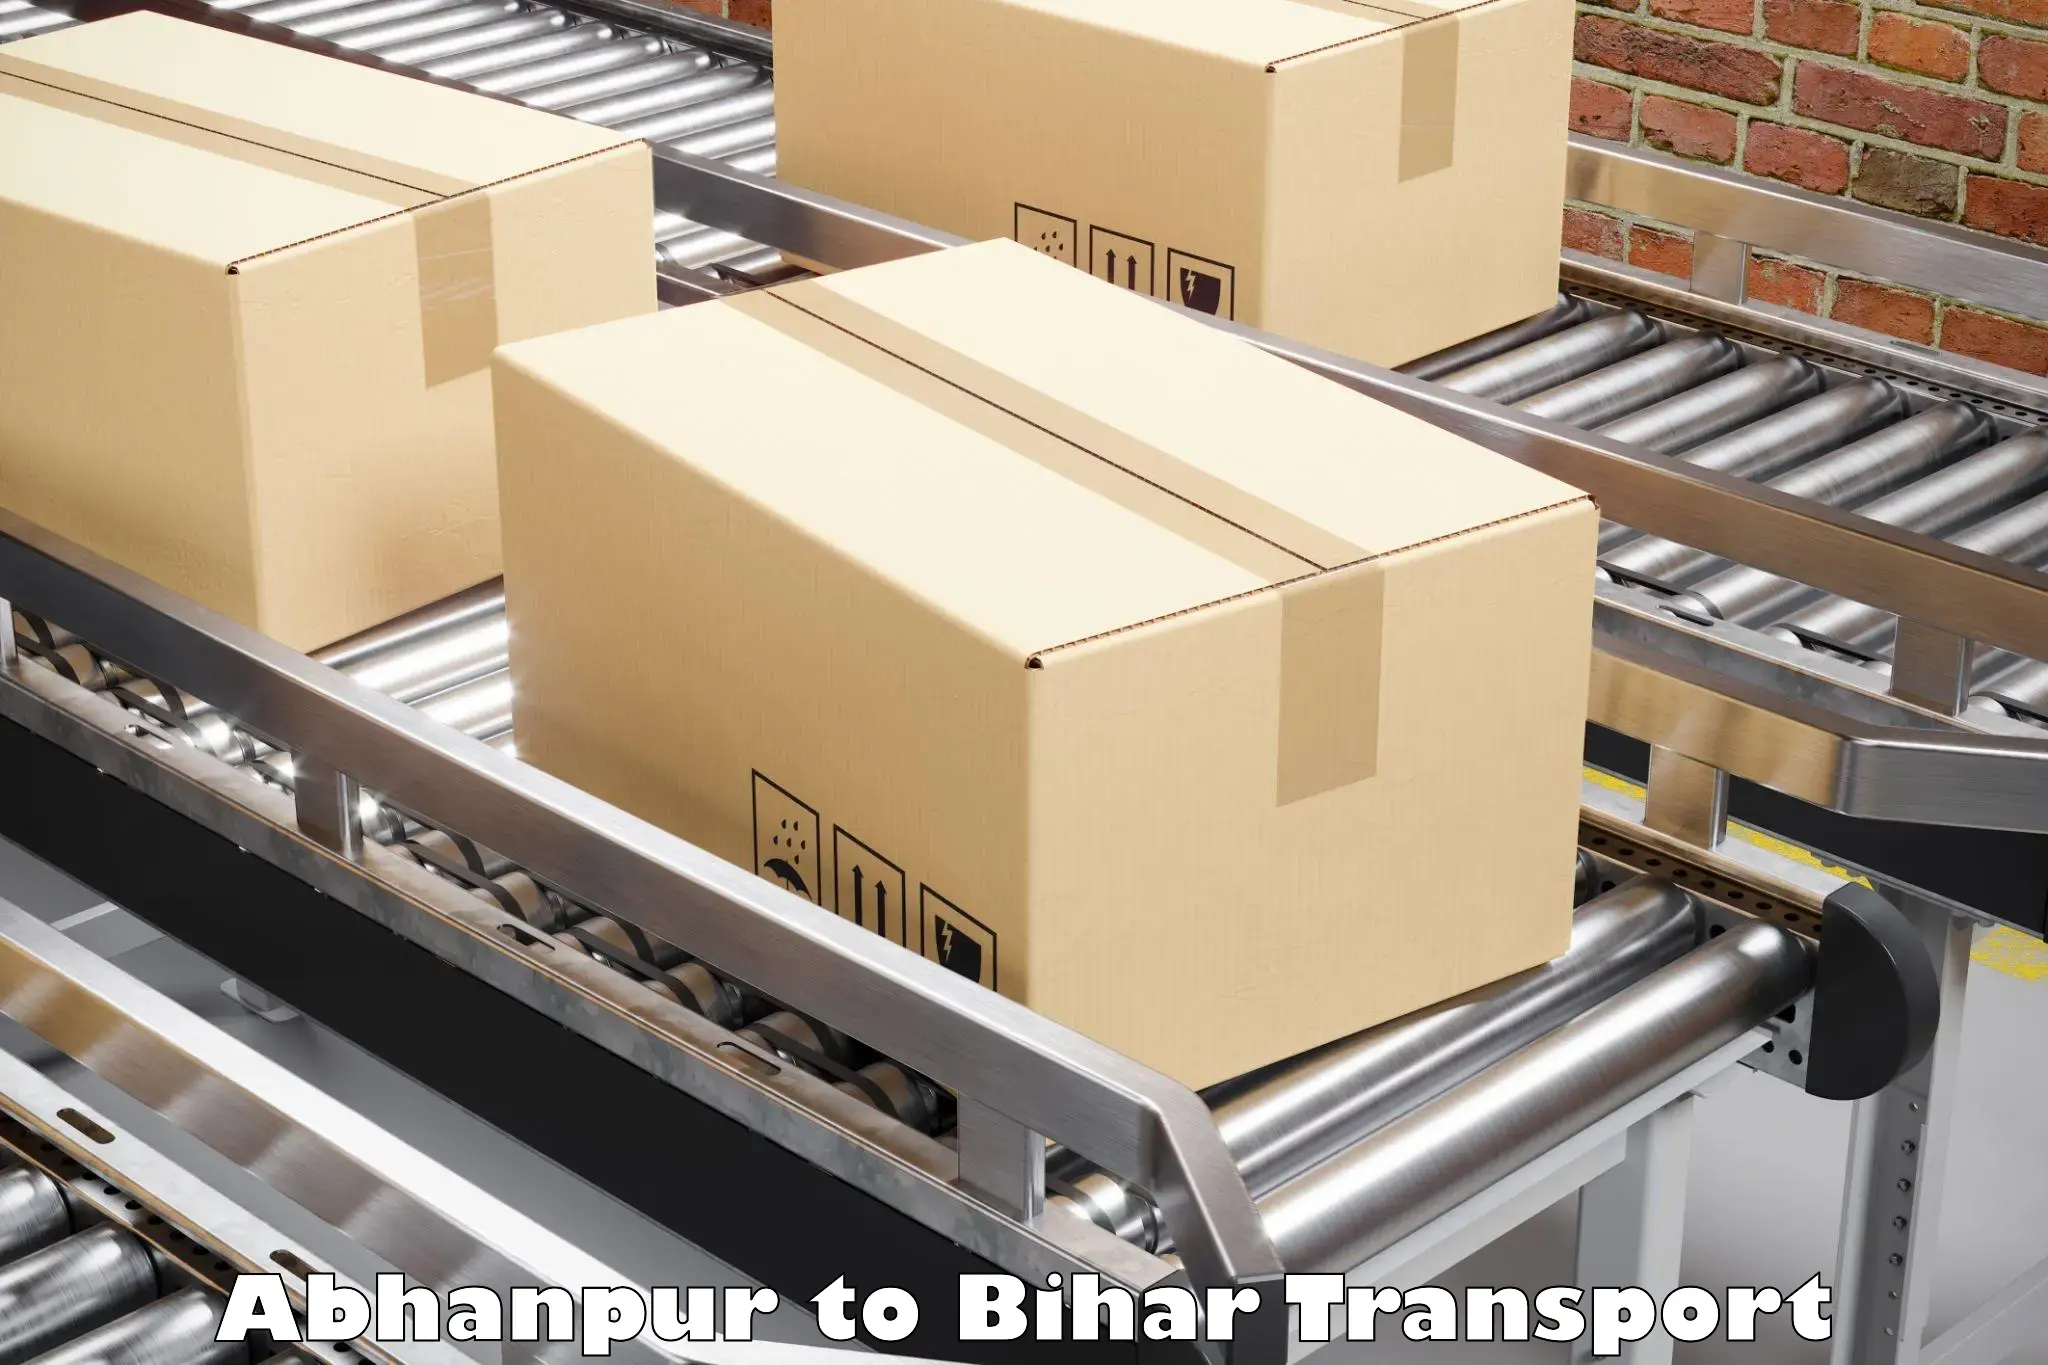 Air freight transport services Abhanpur to Fatwah